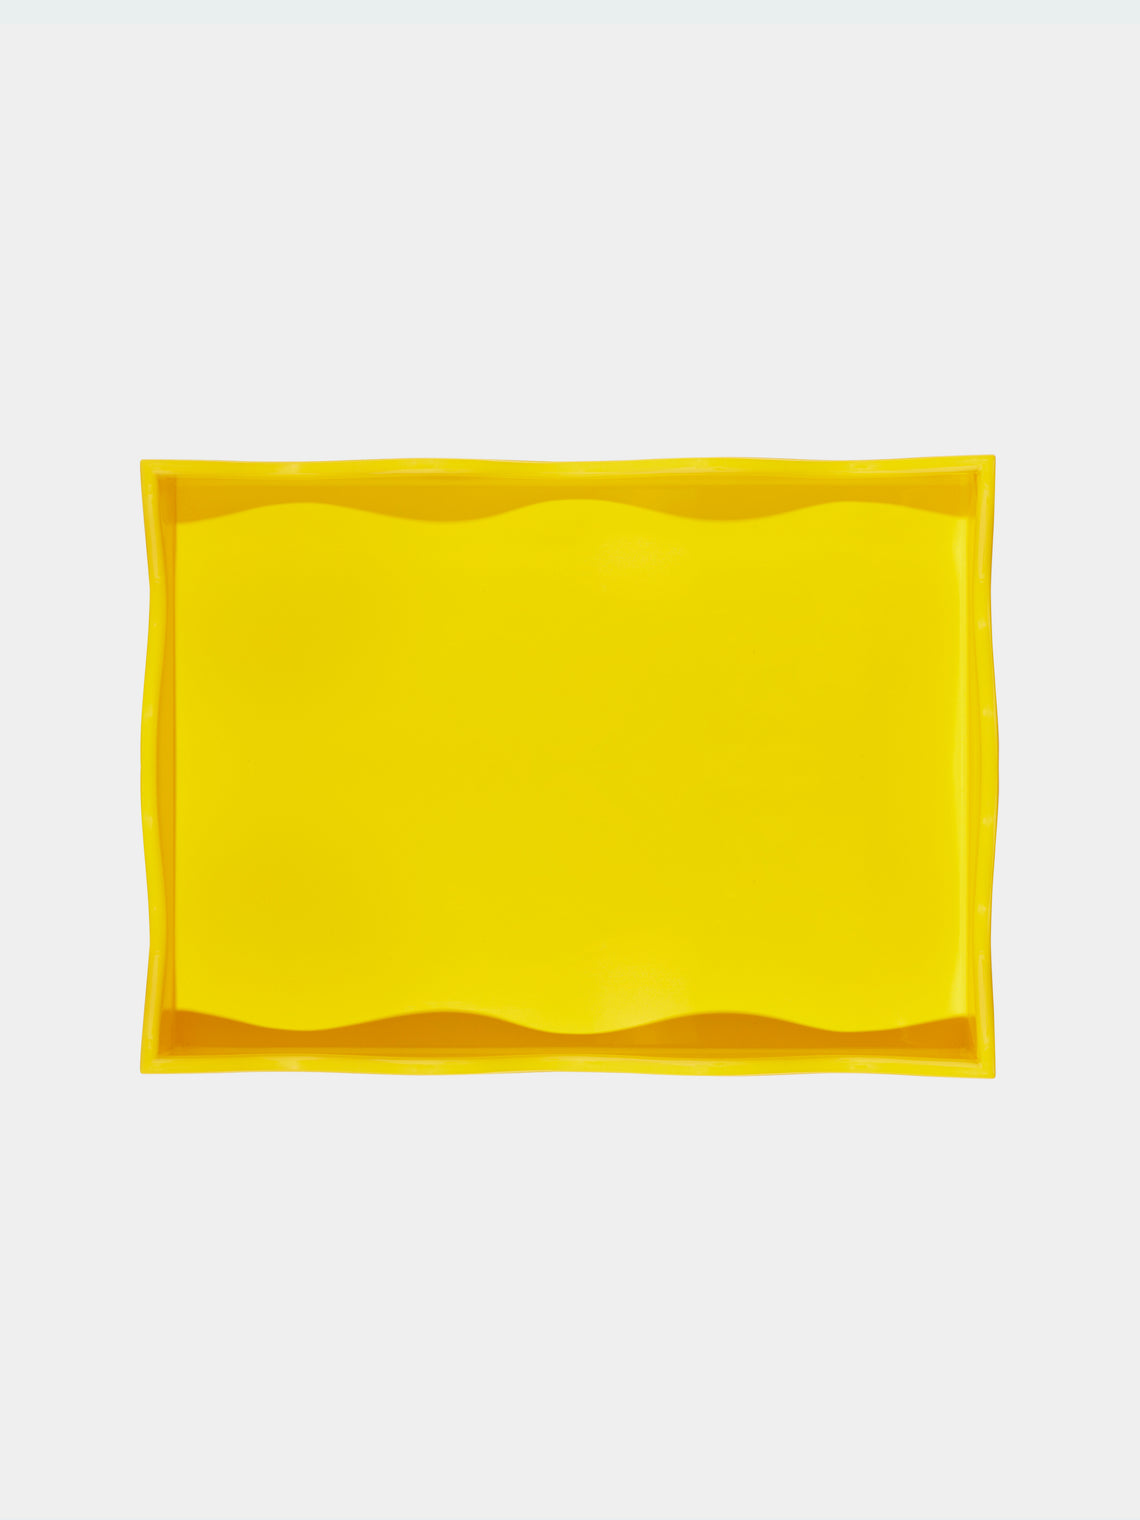 The Lacquer Company - Belles Rives Lacquered Small Tray - Yellow - ABASK - 